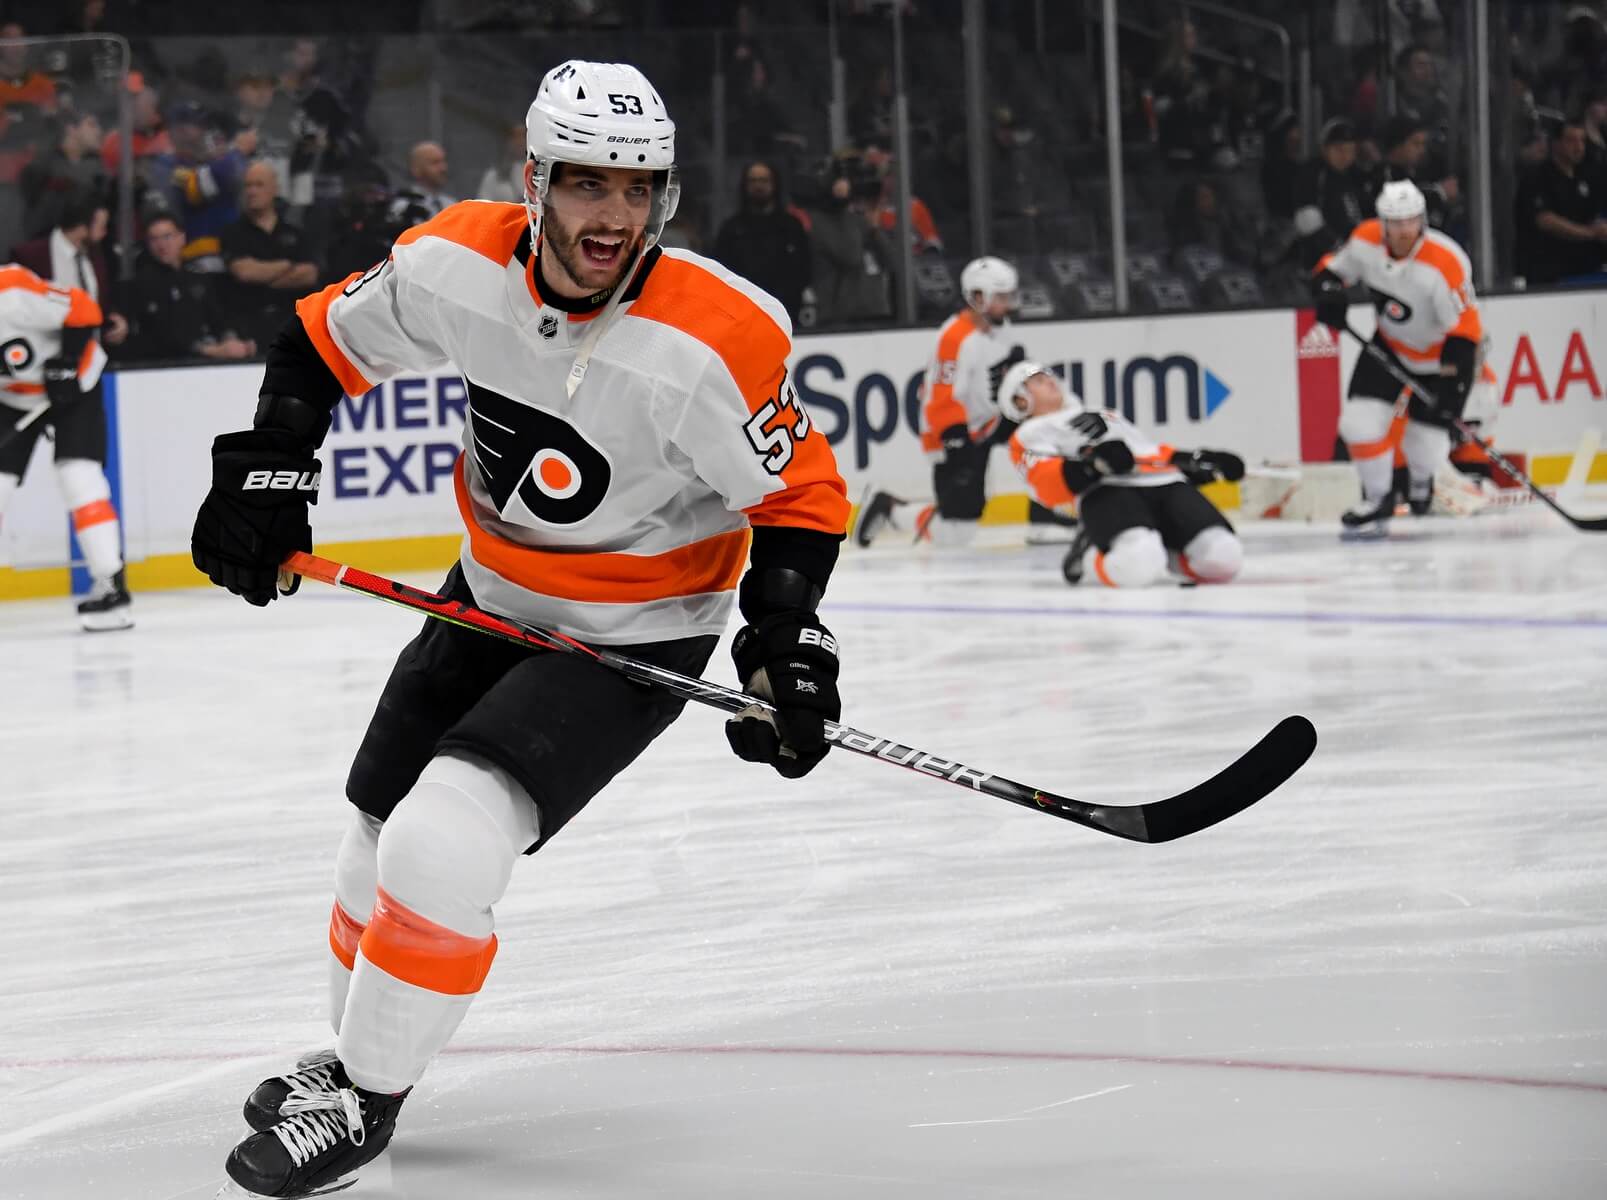 Union's Gostisbehere simply outstanding